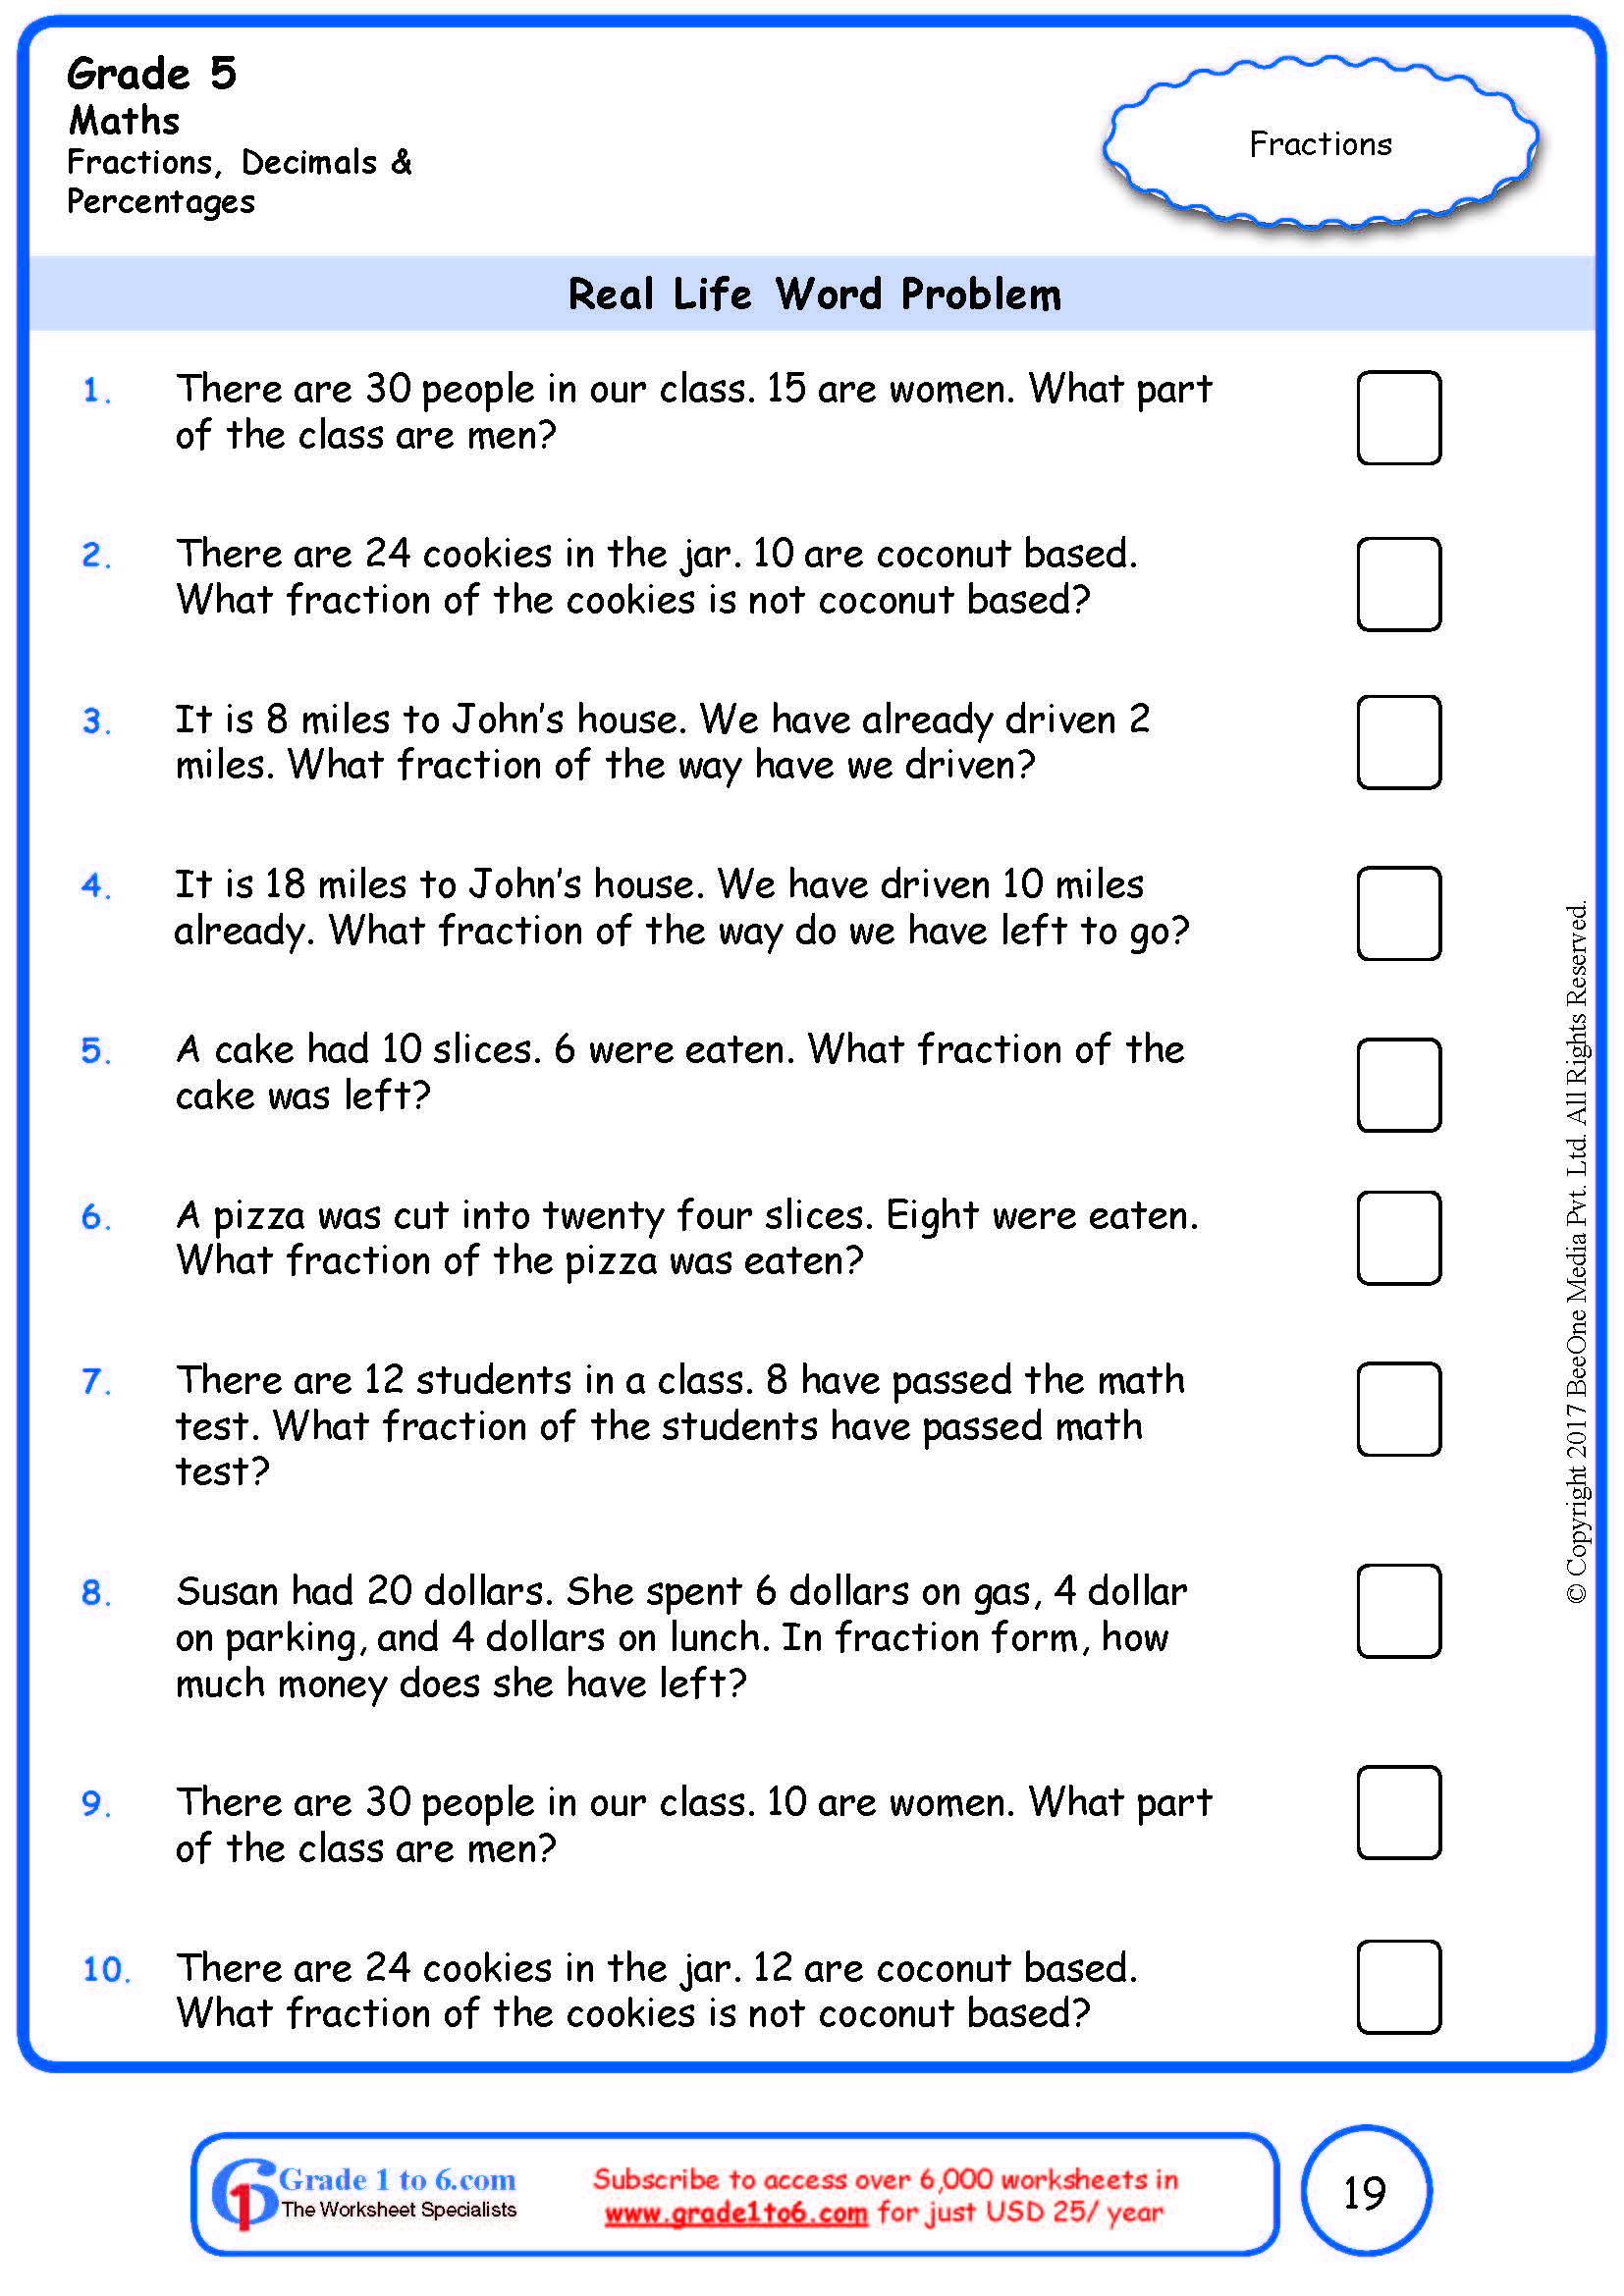 maths-worksheets-for-grade-1-word-problems-high-quality-maths